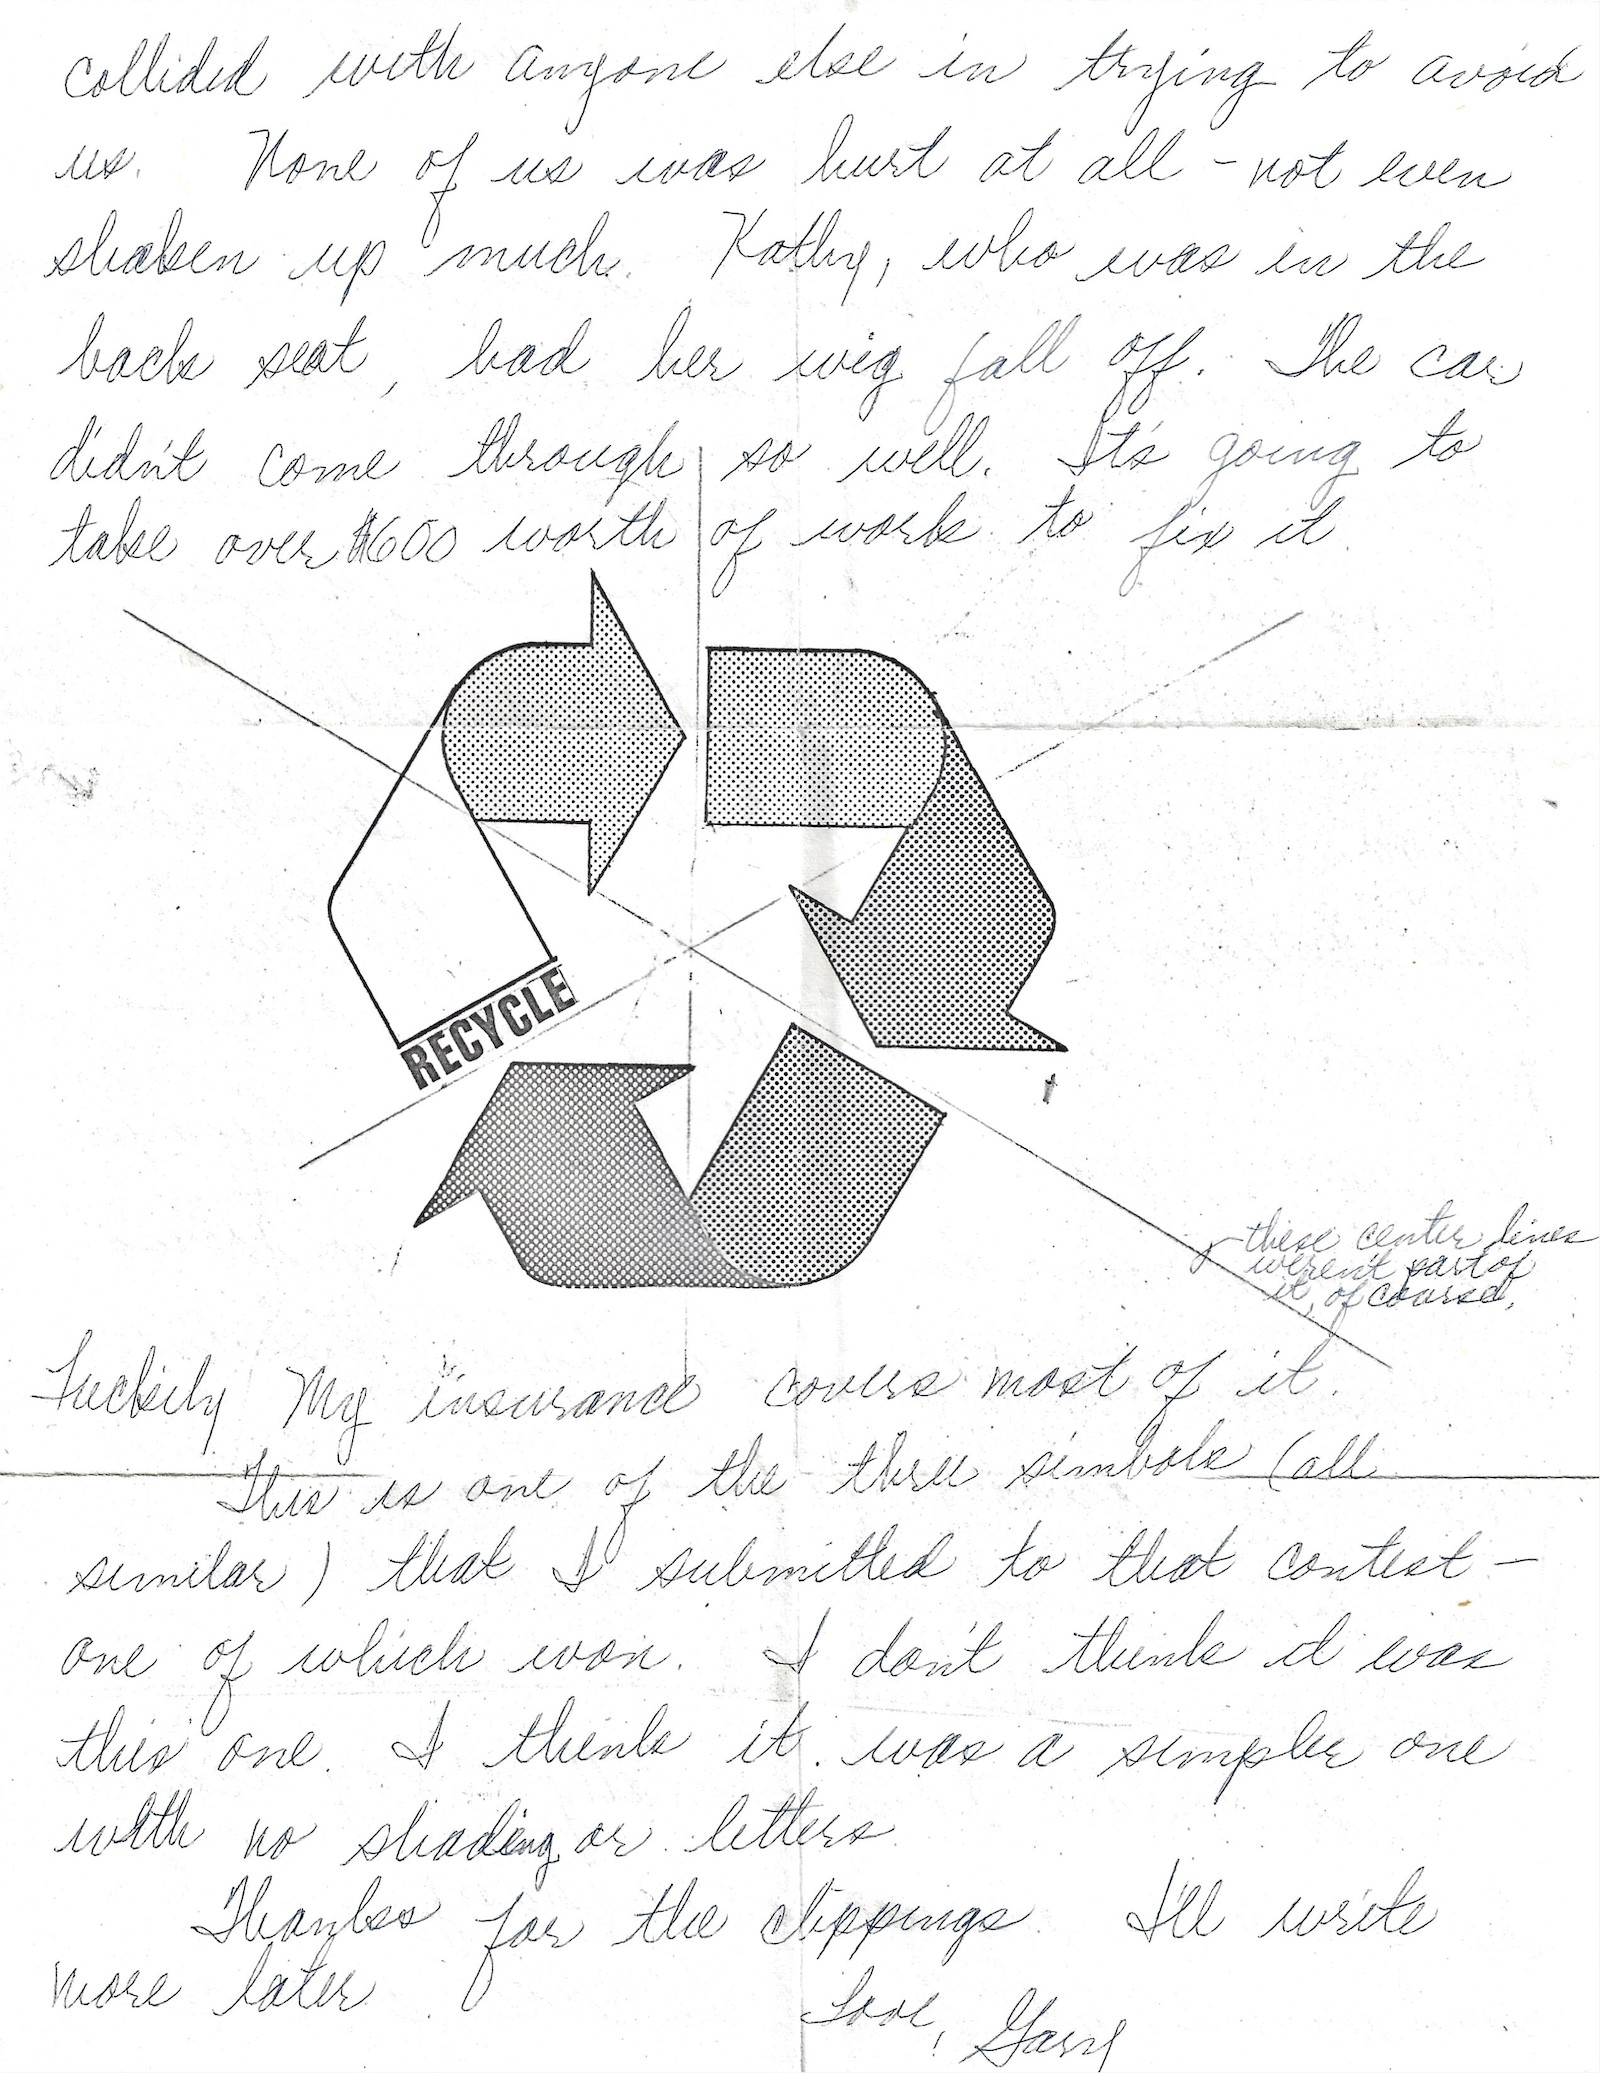 A handwritten letter with the recycling symbol on it